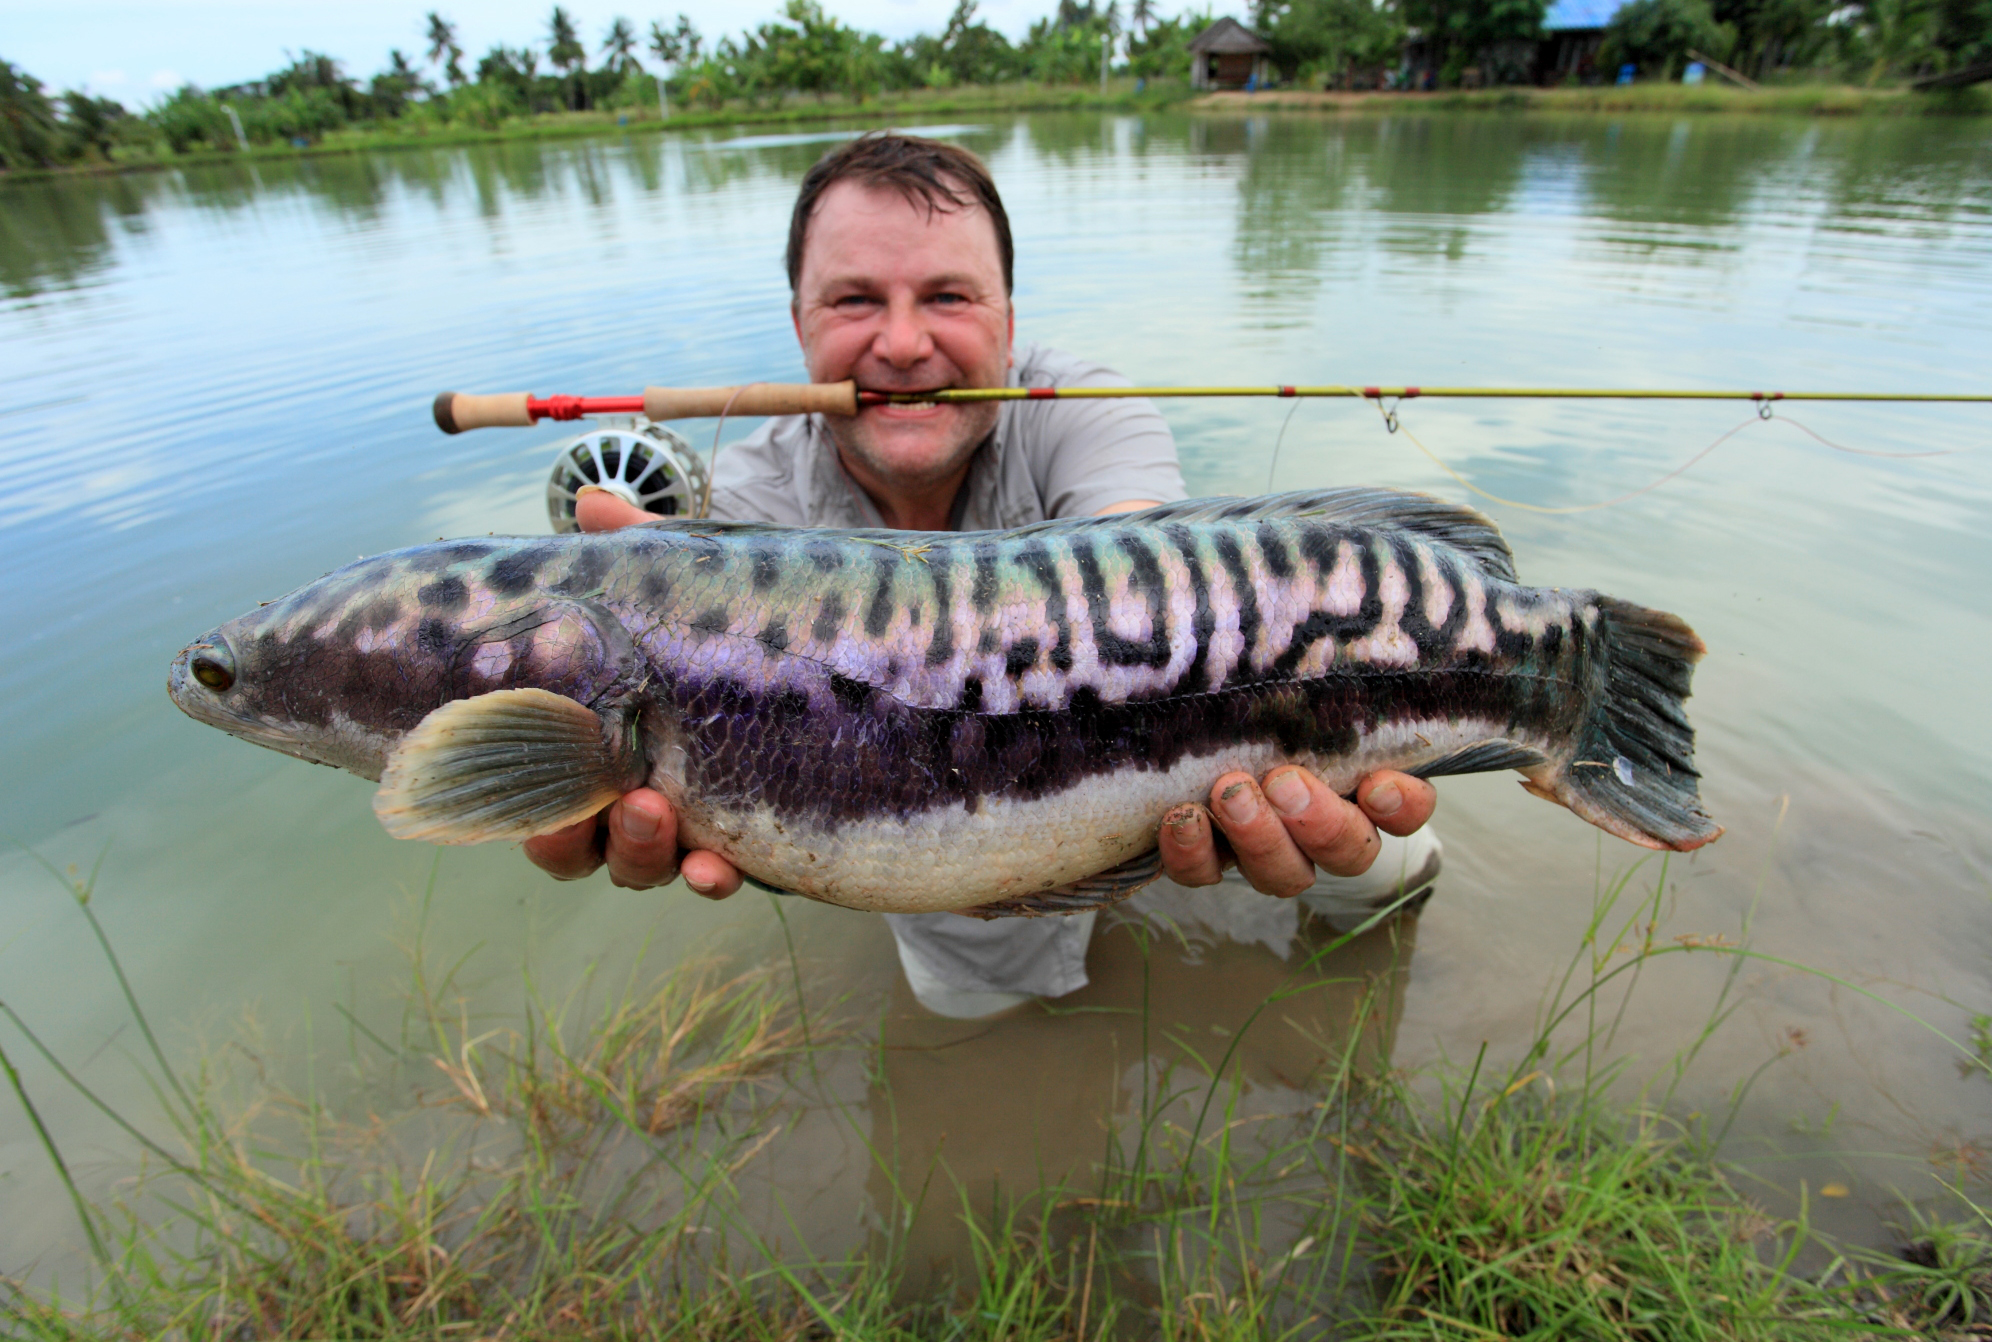 An angler holds a purple snakehead in spawning colors.